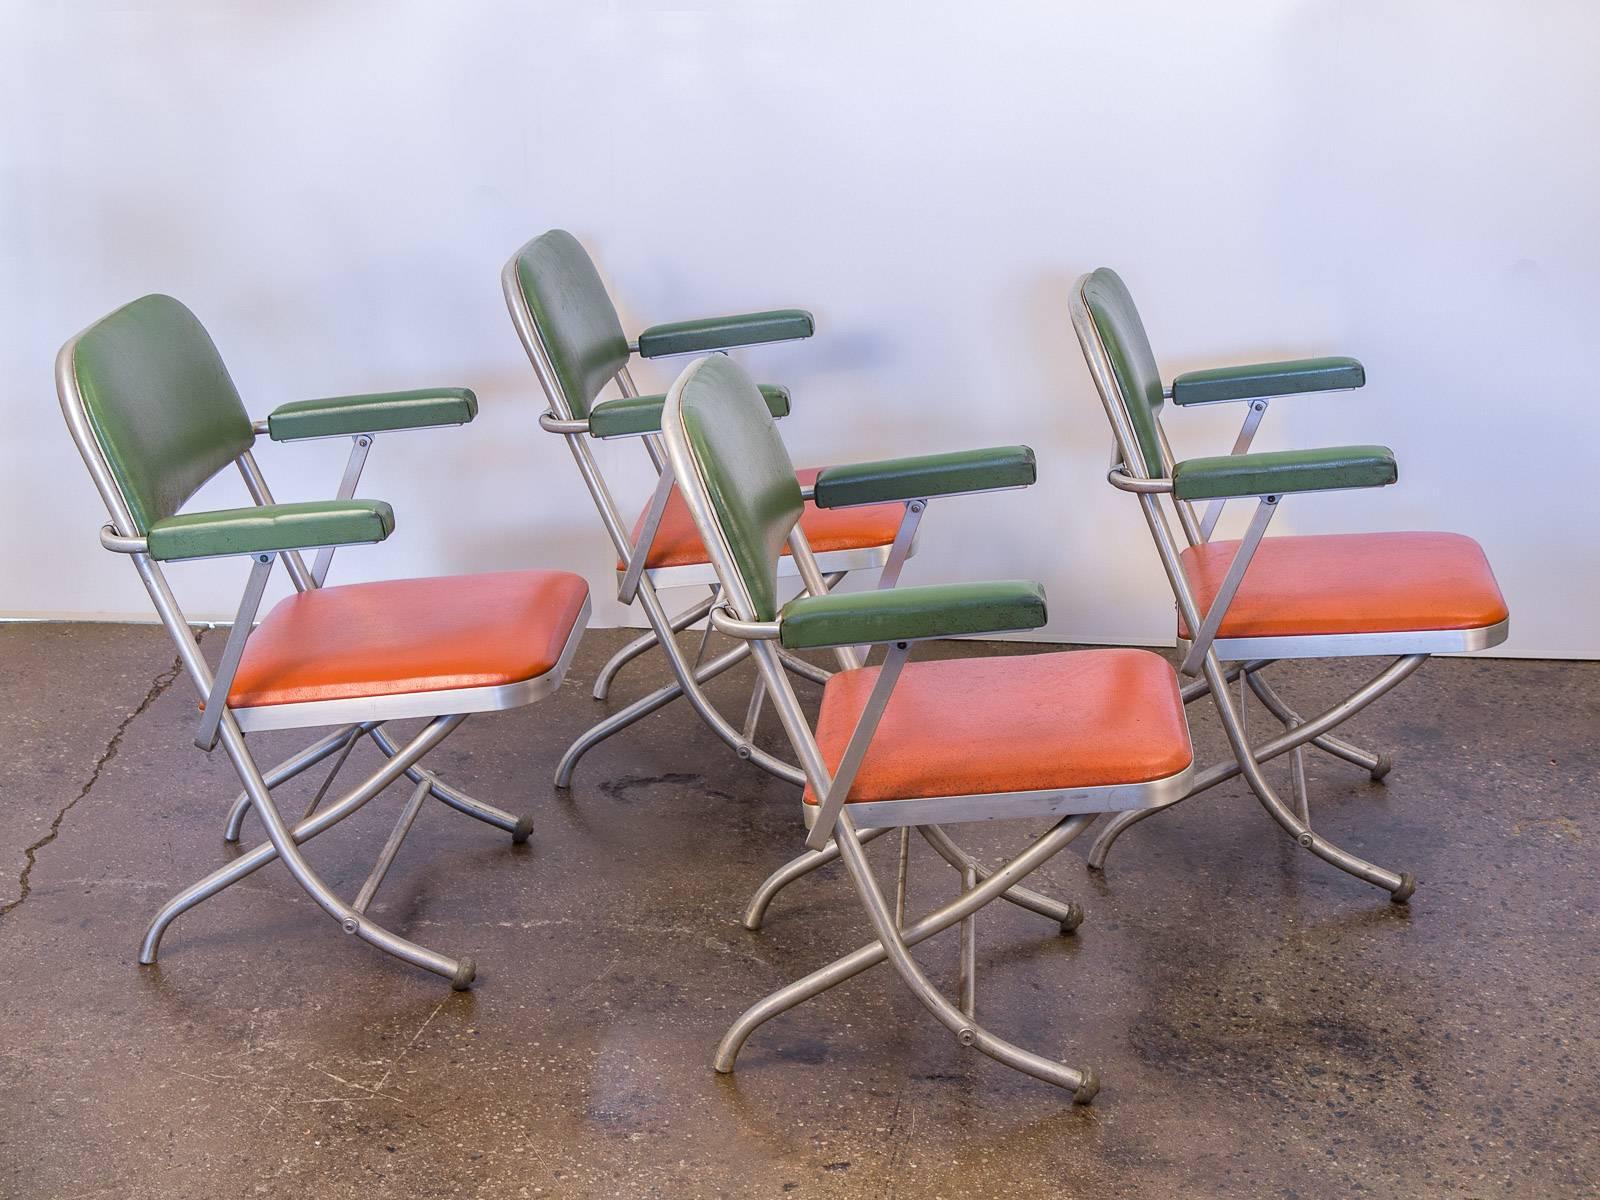 Set of four, 1940s, Warren McArthur two-tone folding armchairs for Mayfair Industries. In excellent vintage condition. Tubular, brushed aluminum frames are sculptural and fold with ease, while the subdued orange and green cushions are robust and